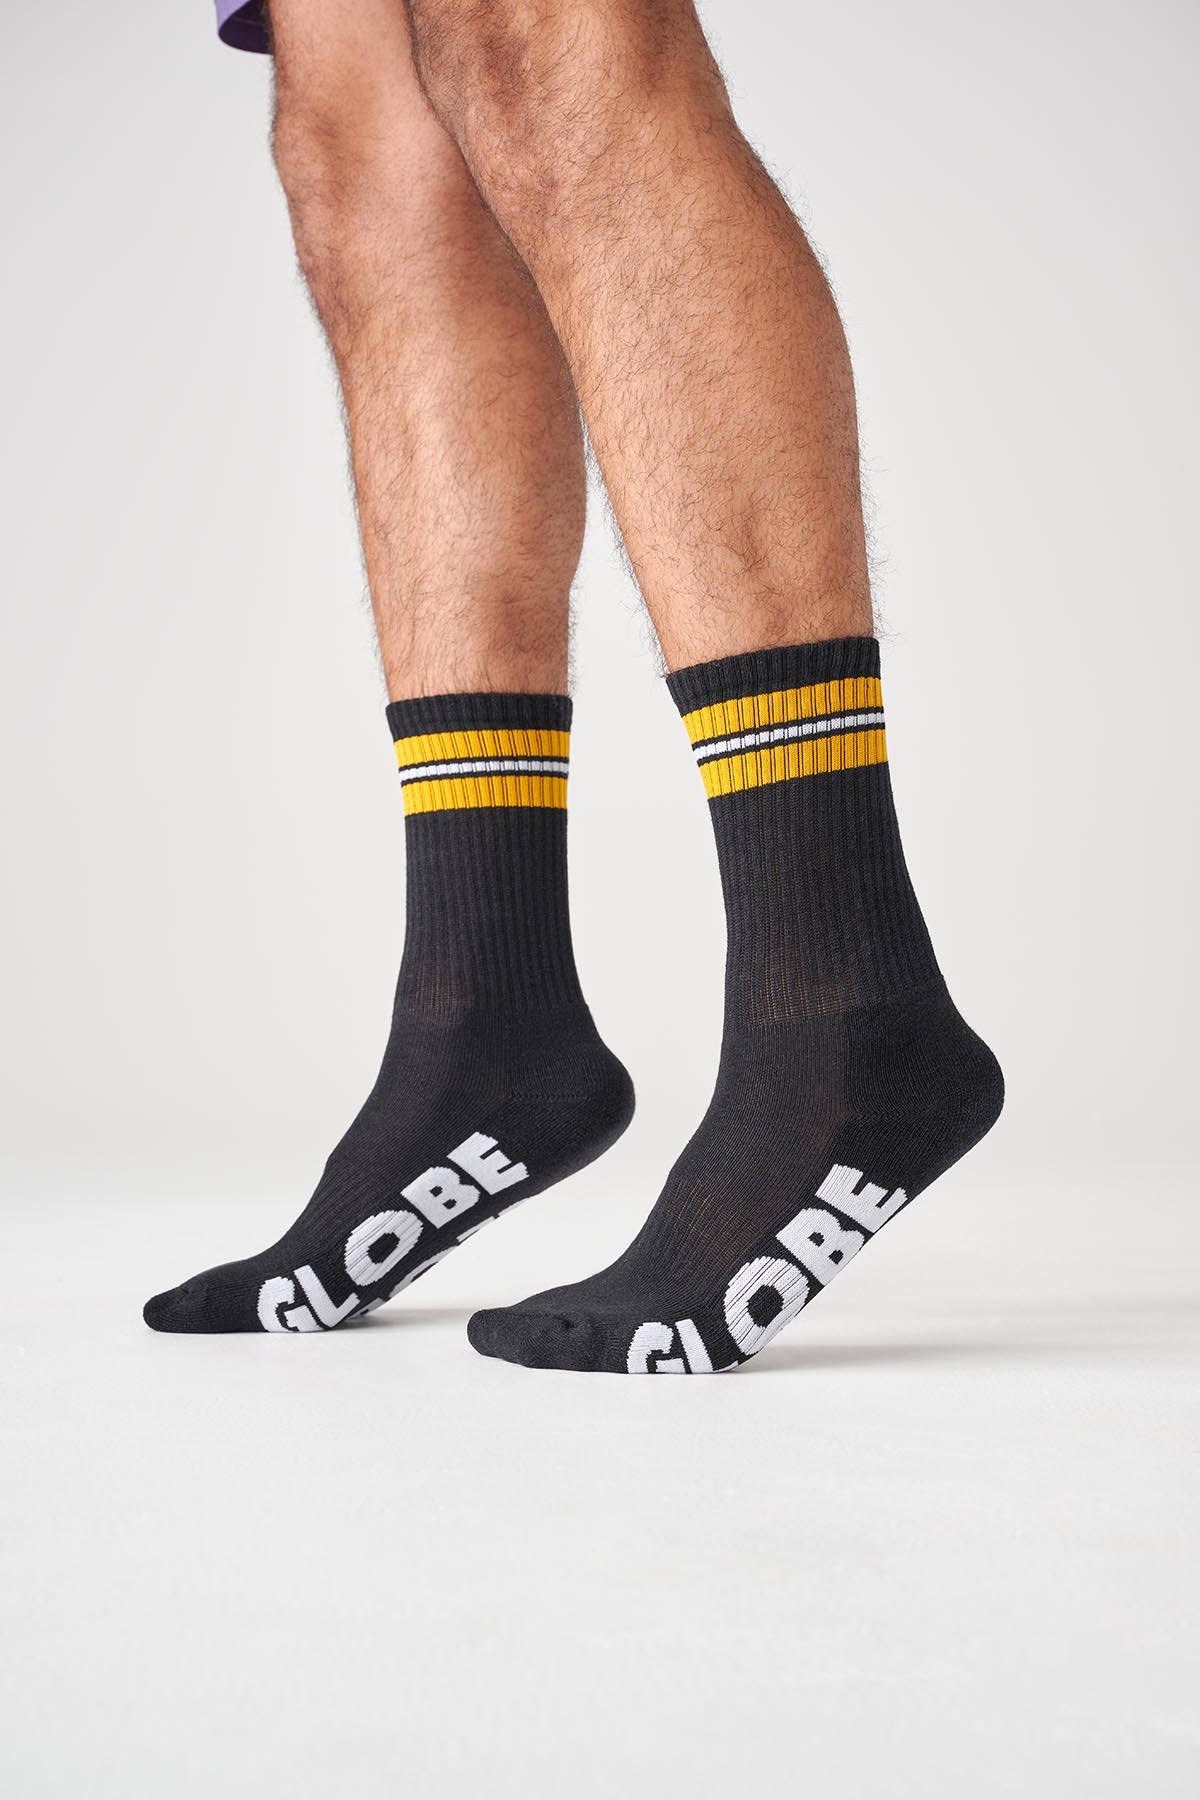 Off Course Crew Sock 3 Pack - Assorted